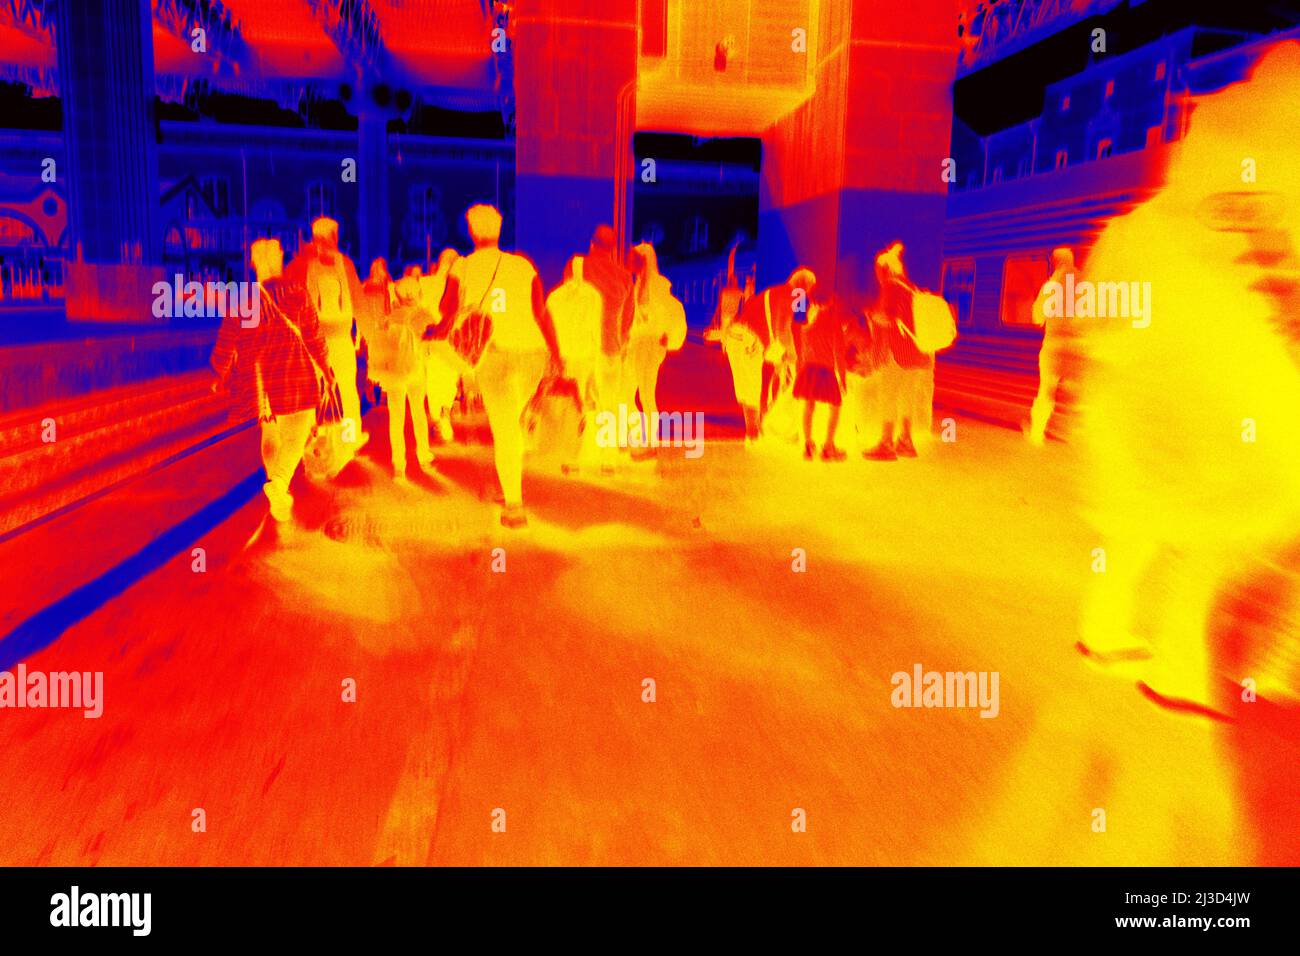 Railway station. Commuter train and passengers on the boarding platform, trainshed. Illustration of thermal image - thermal impressionism. Stock Photo